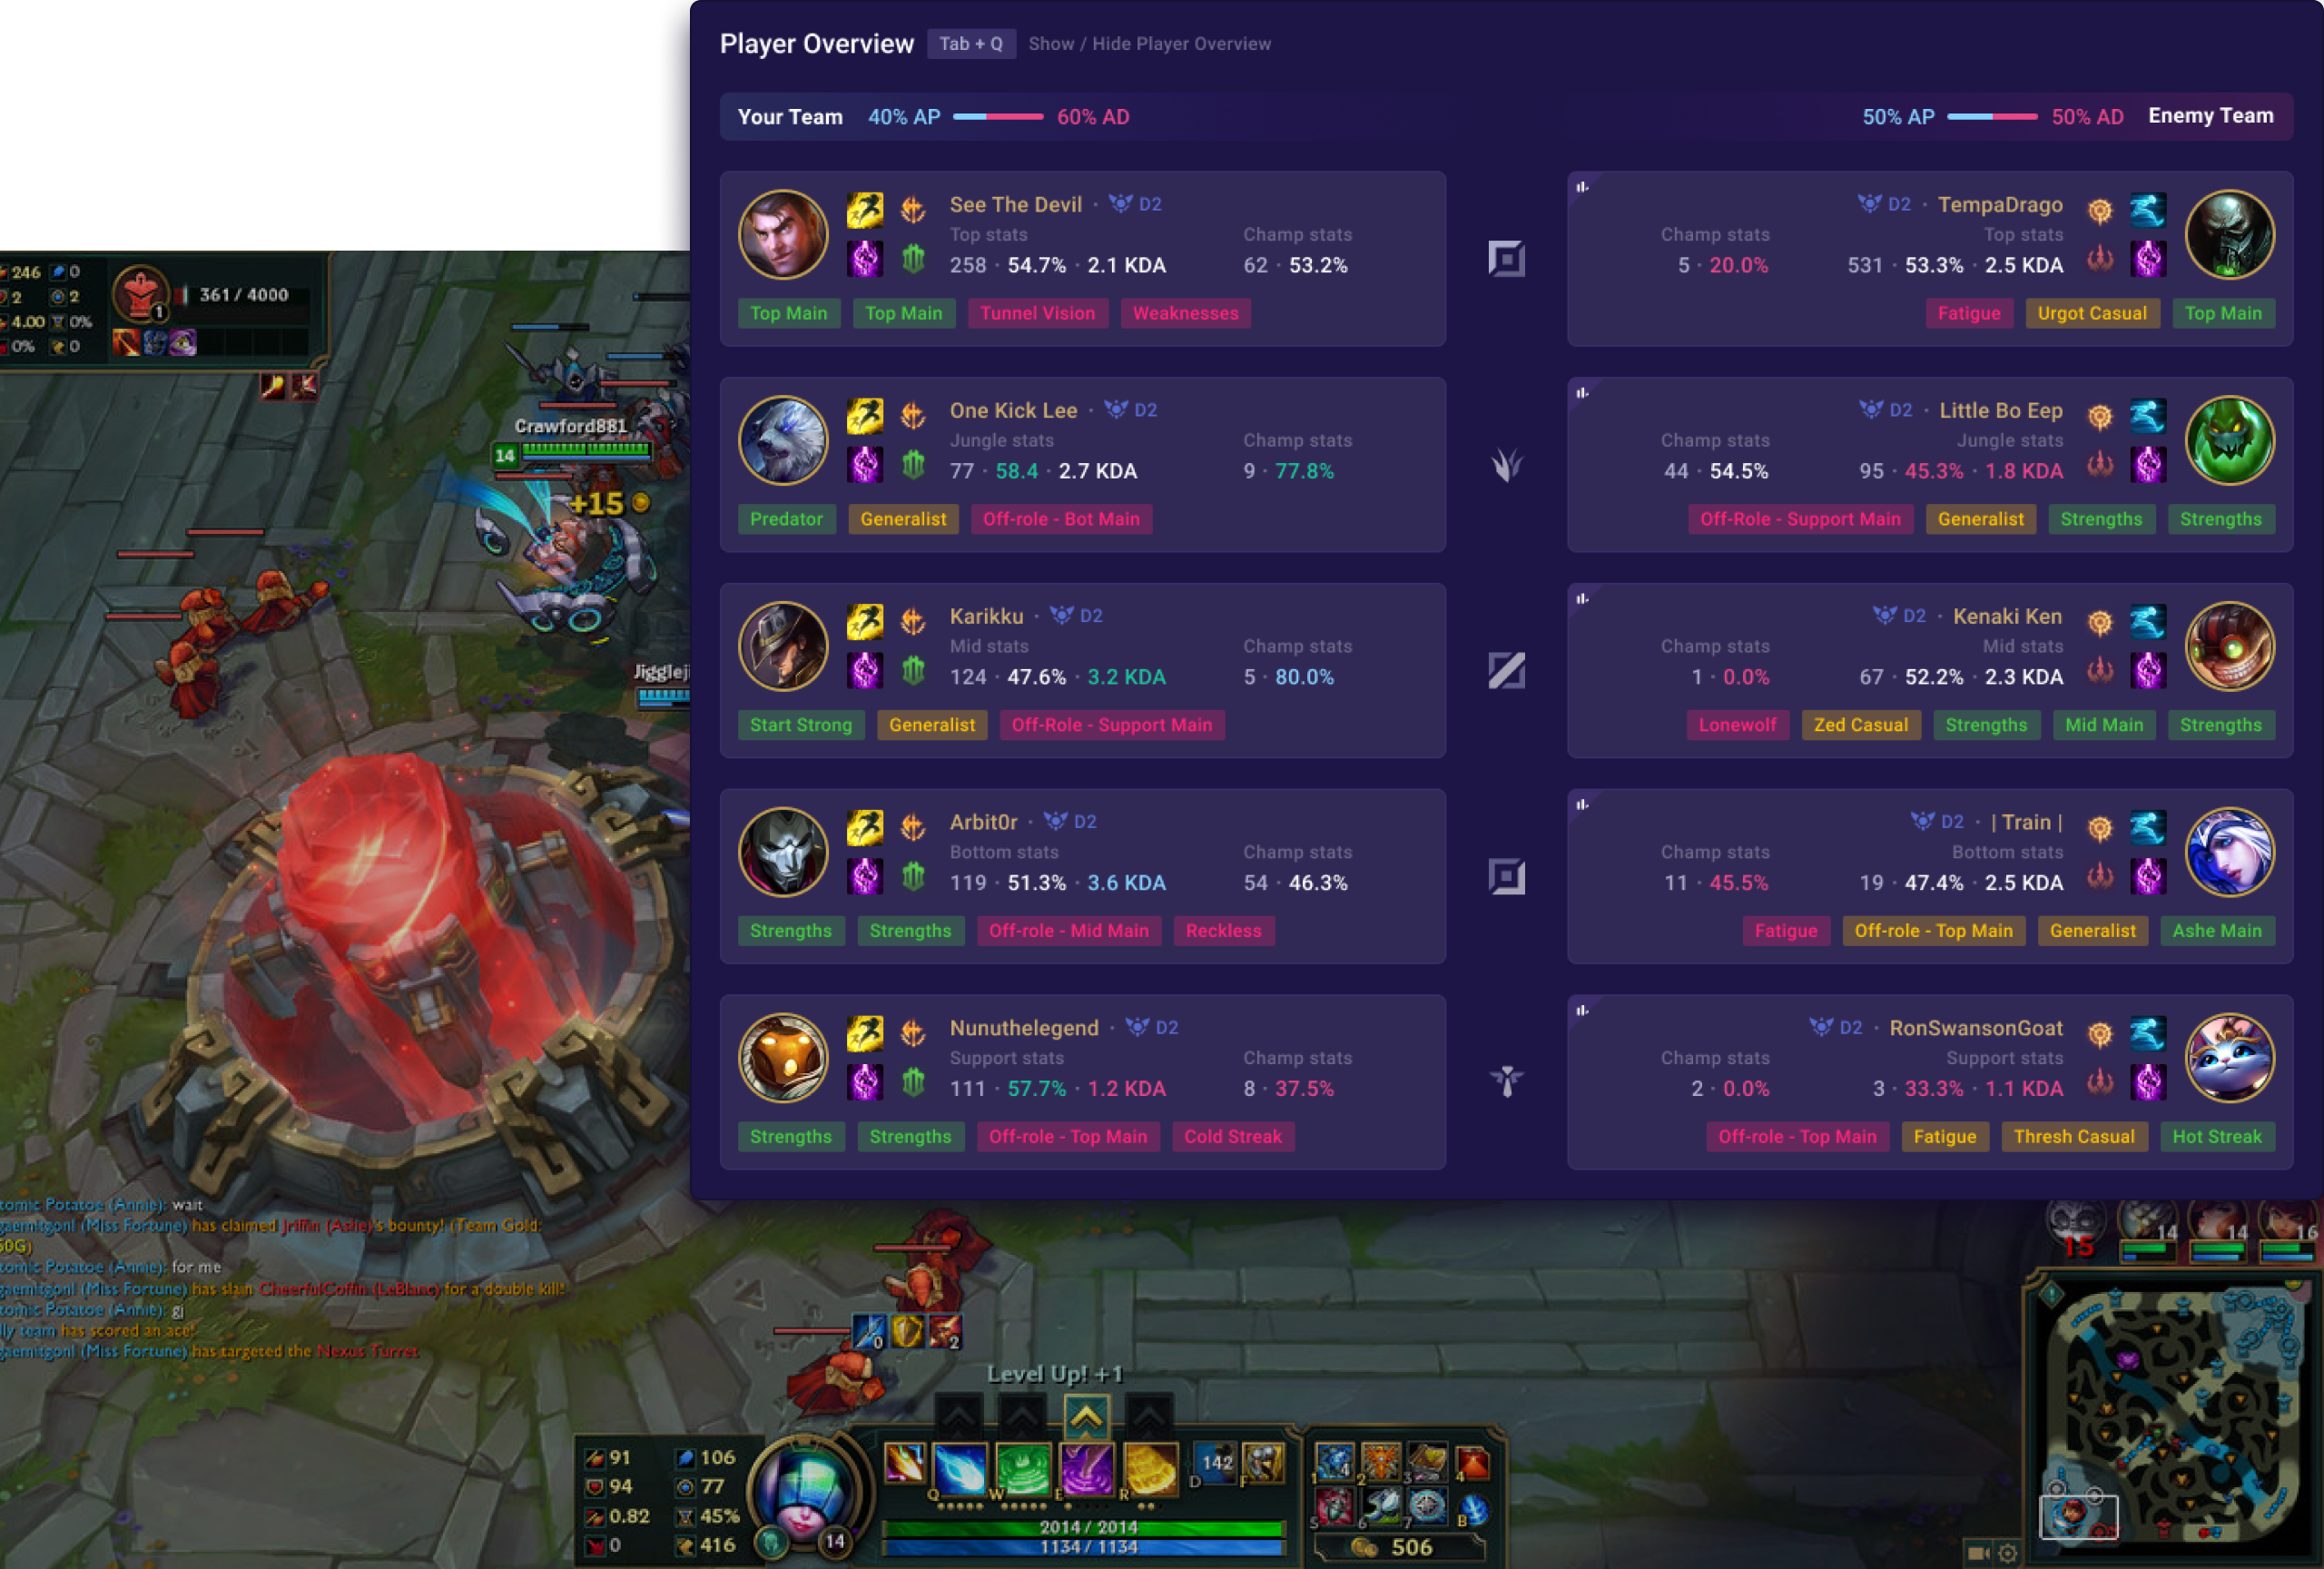 Zar App - The Best In-Game Coaching Overlay for League of Legends - Zar